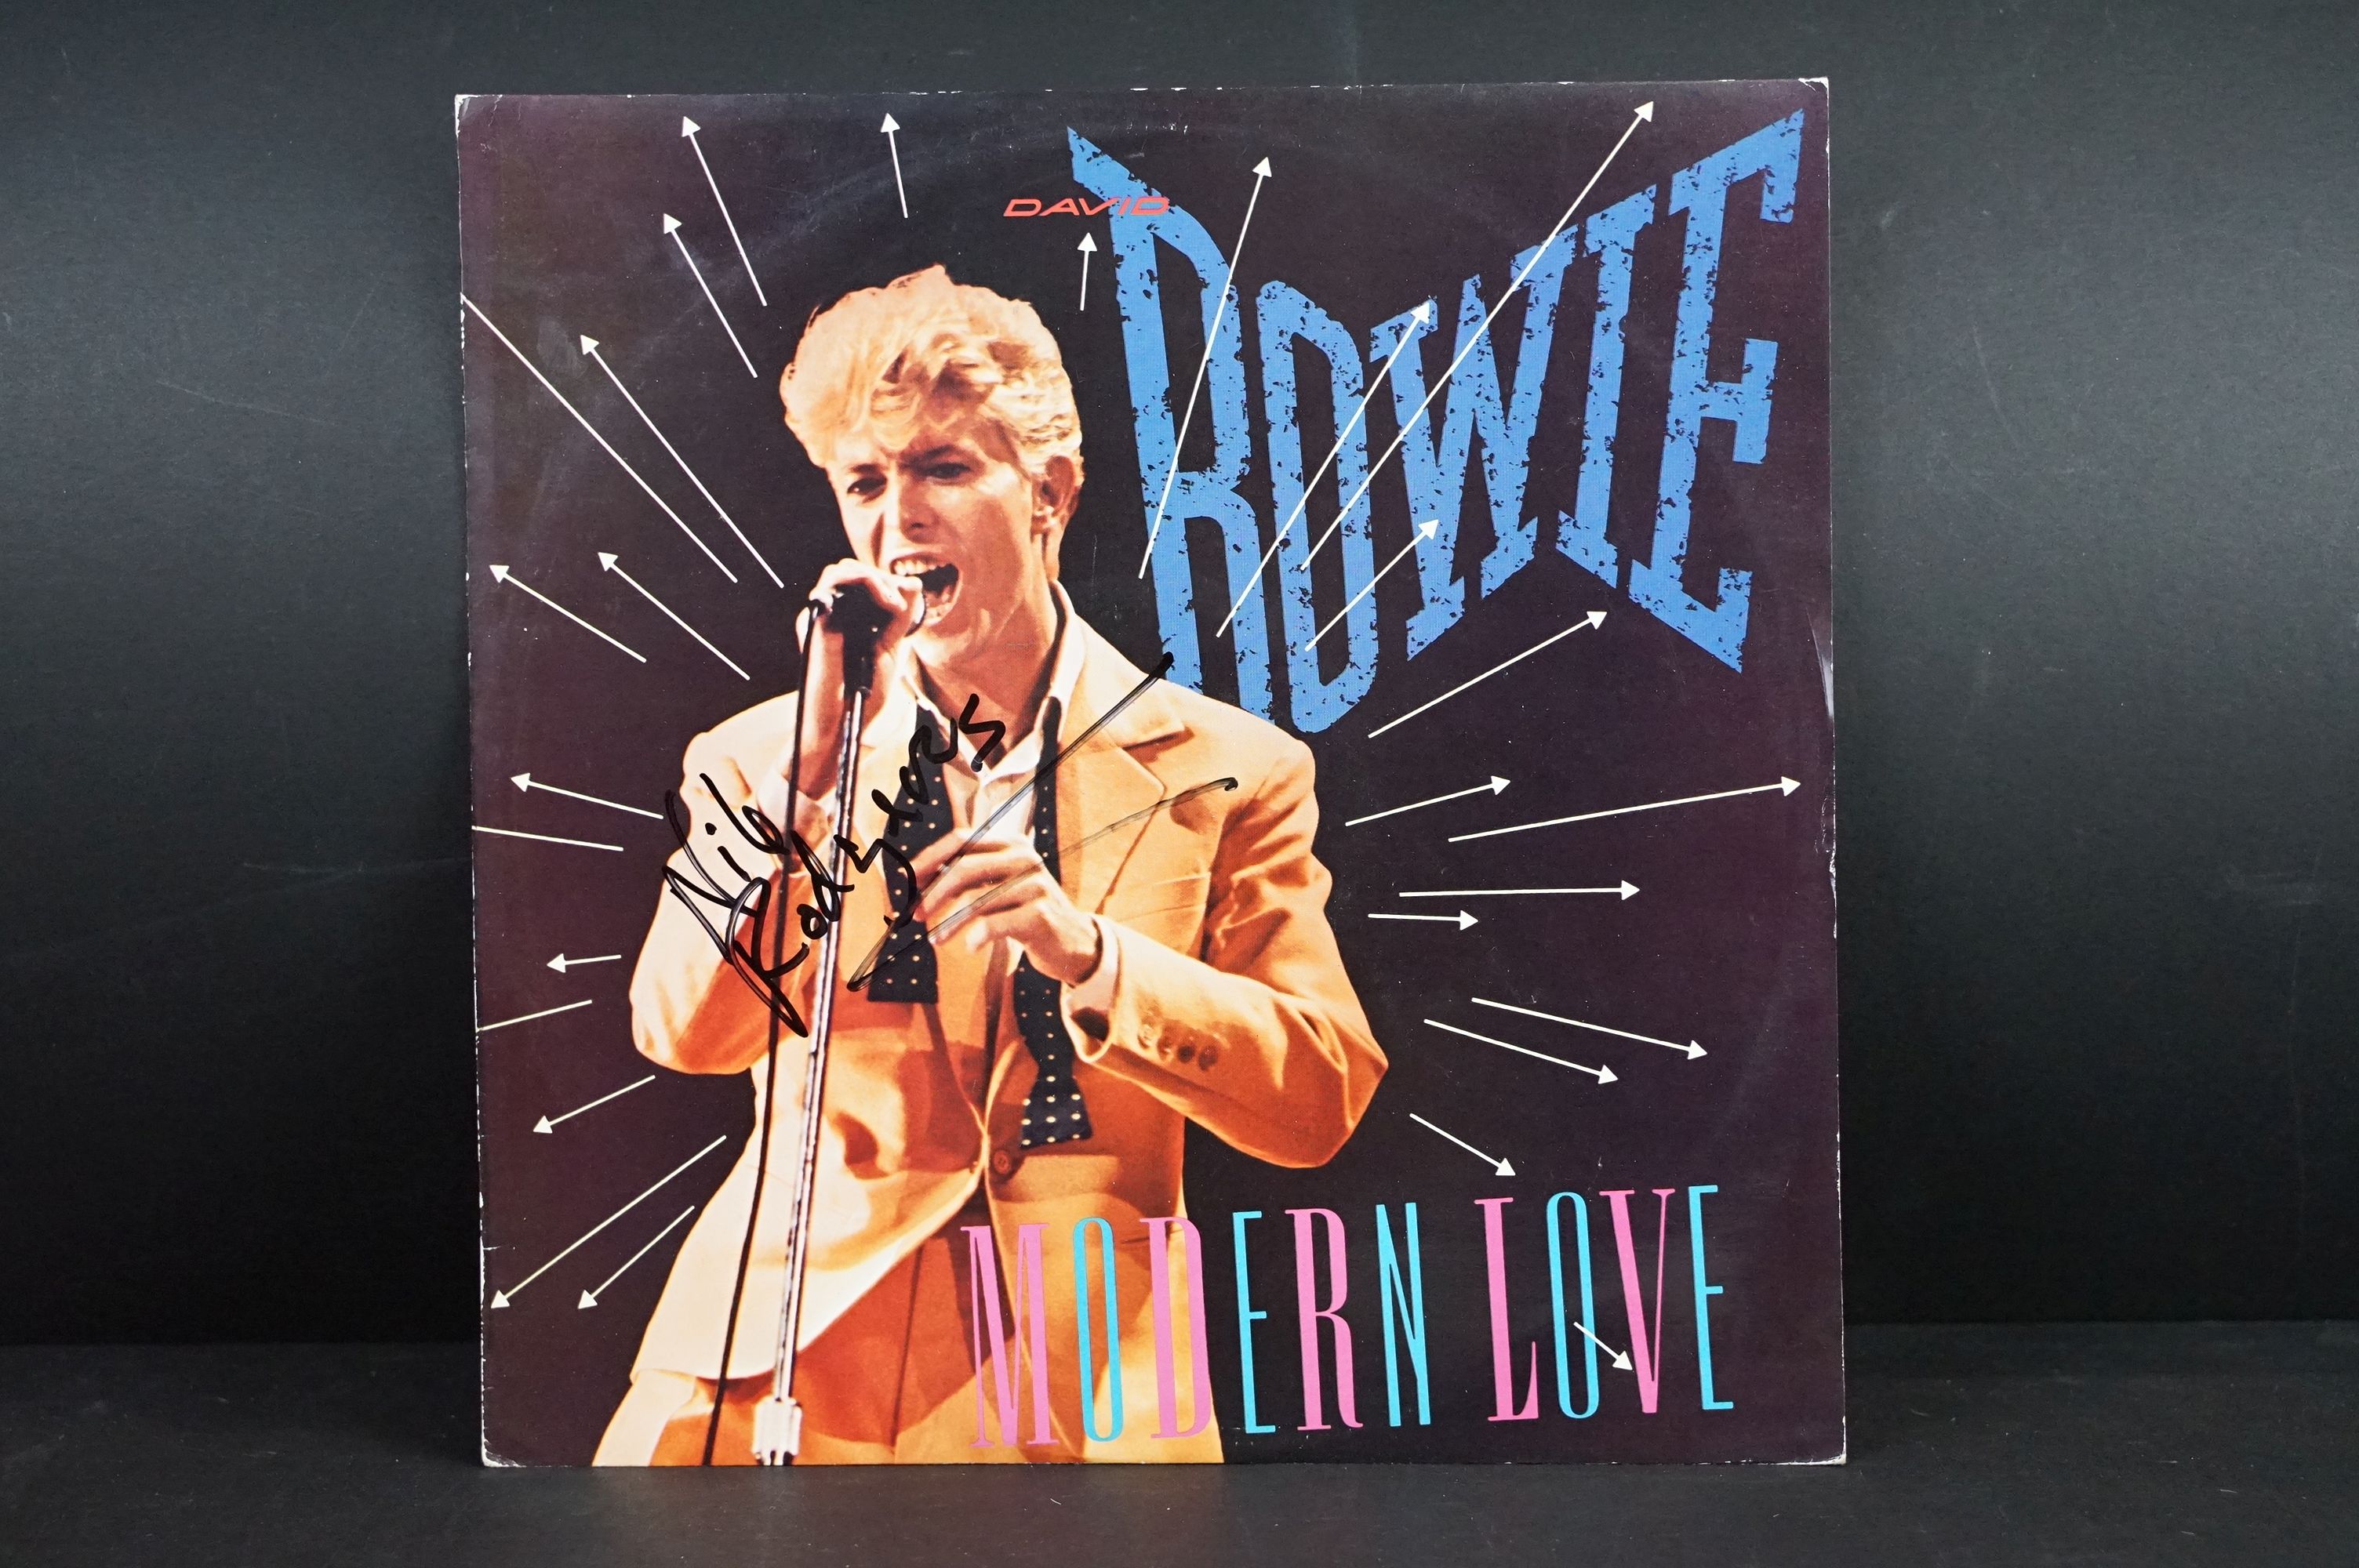 Vinyl / Autographs - 7 signed David Bowie 12” singles including demo promos, to include: Let’s Dance - Image 6 of 8